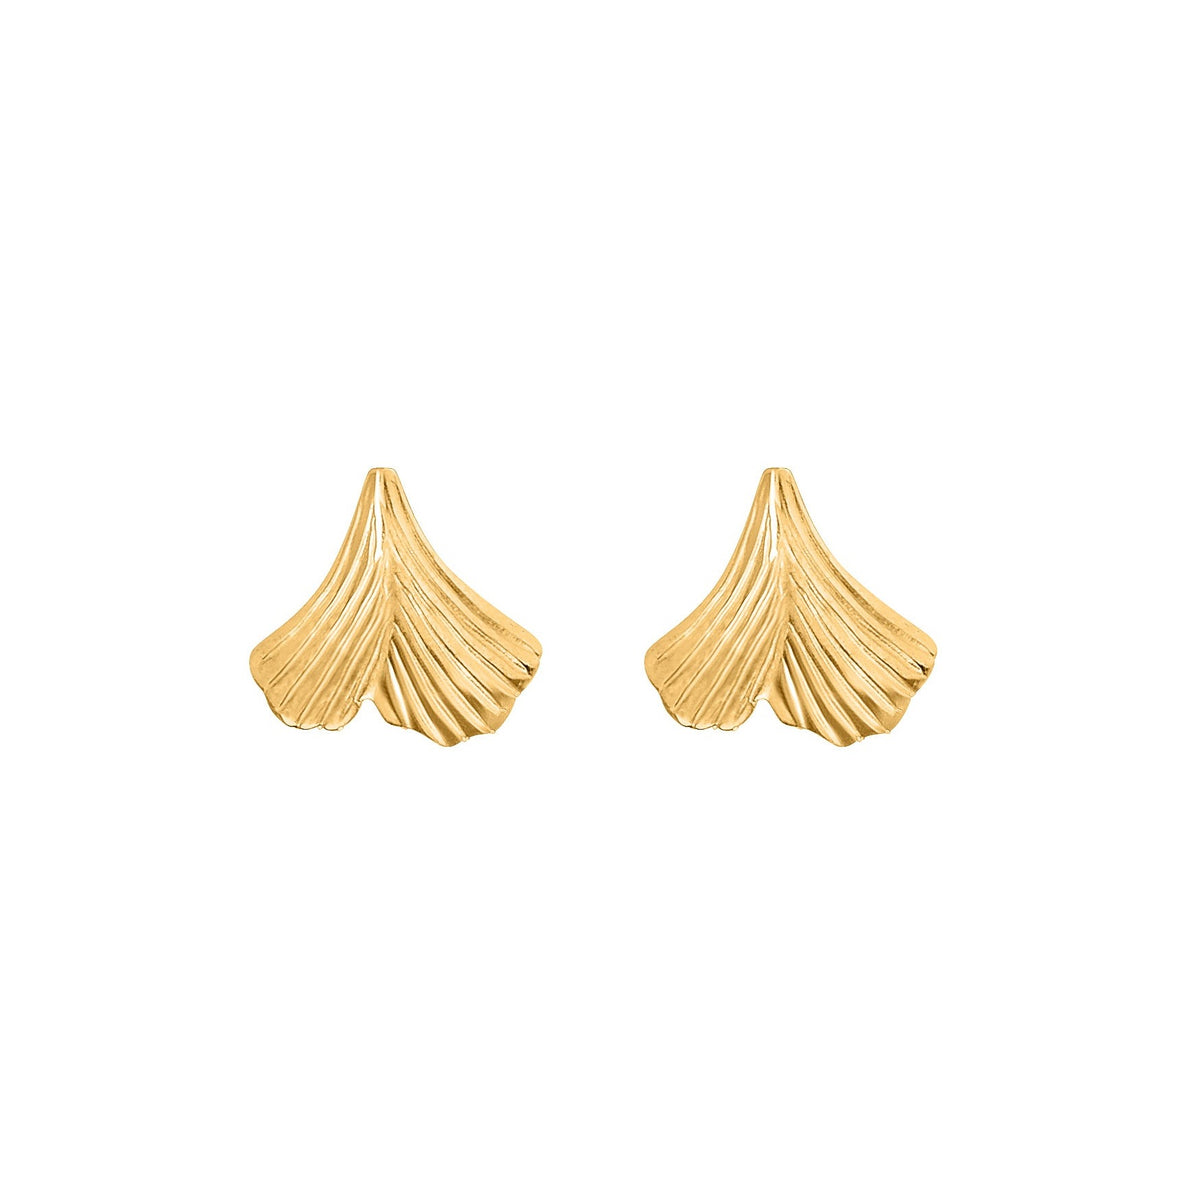 VIKA jewels GINKGO LEAF EARRINGS gold plated  1.5CM long and 1.5CM wide ginkgo leaf earrings Stud earrings are made of 925 recycled sterling silver and handmade in Bali Sold as a pair 18 carat gold plated